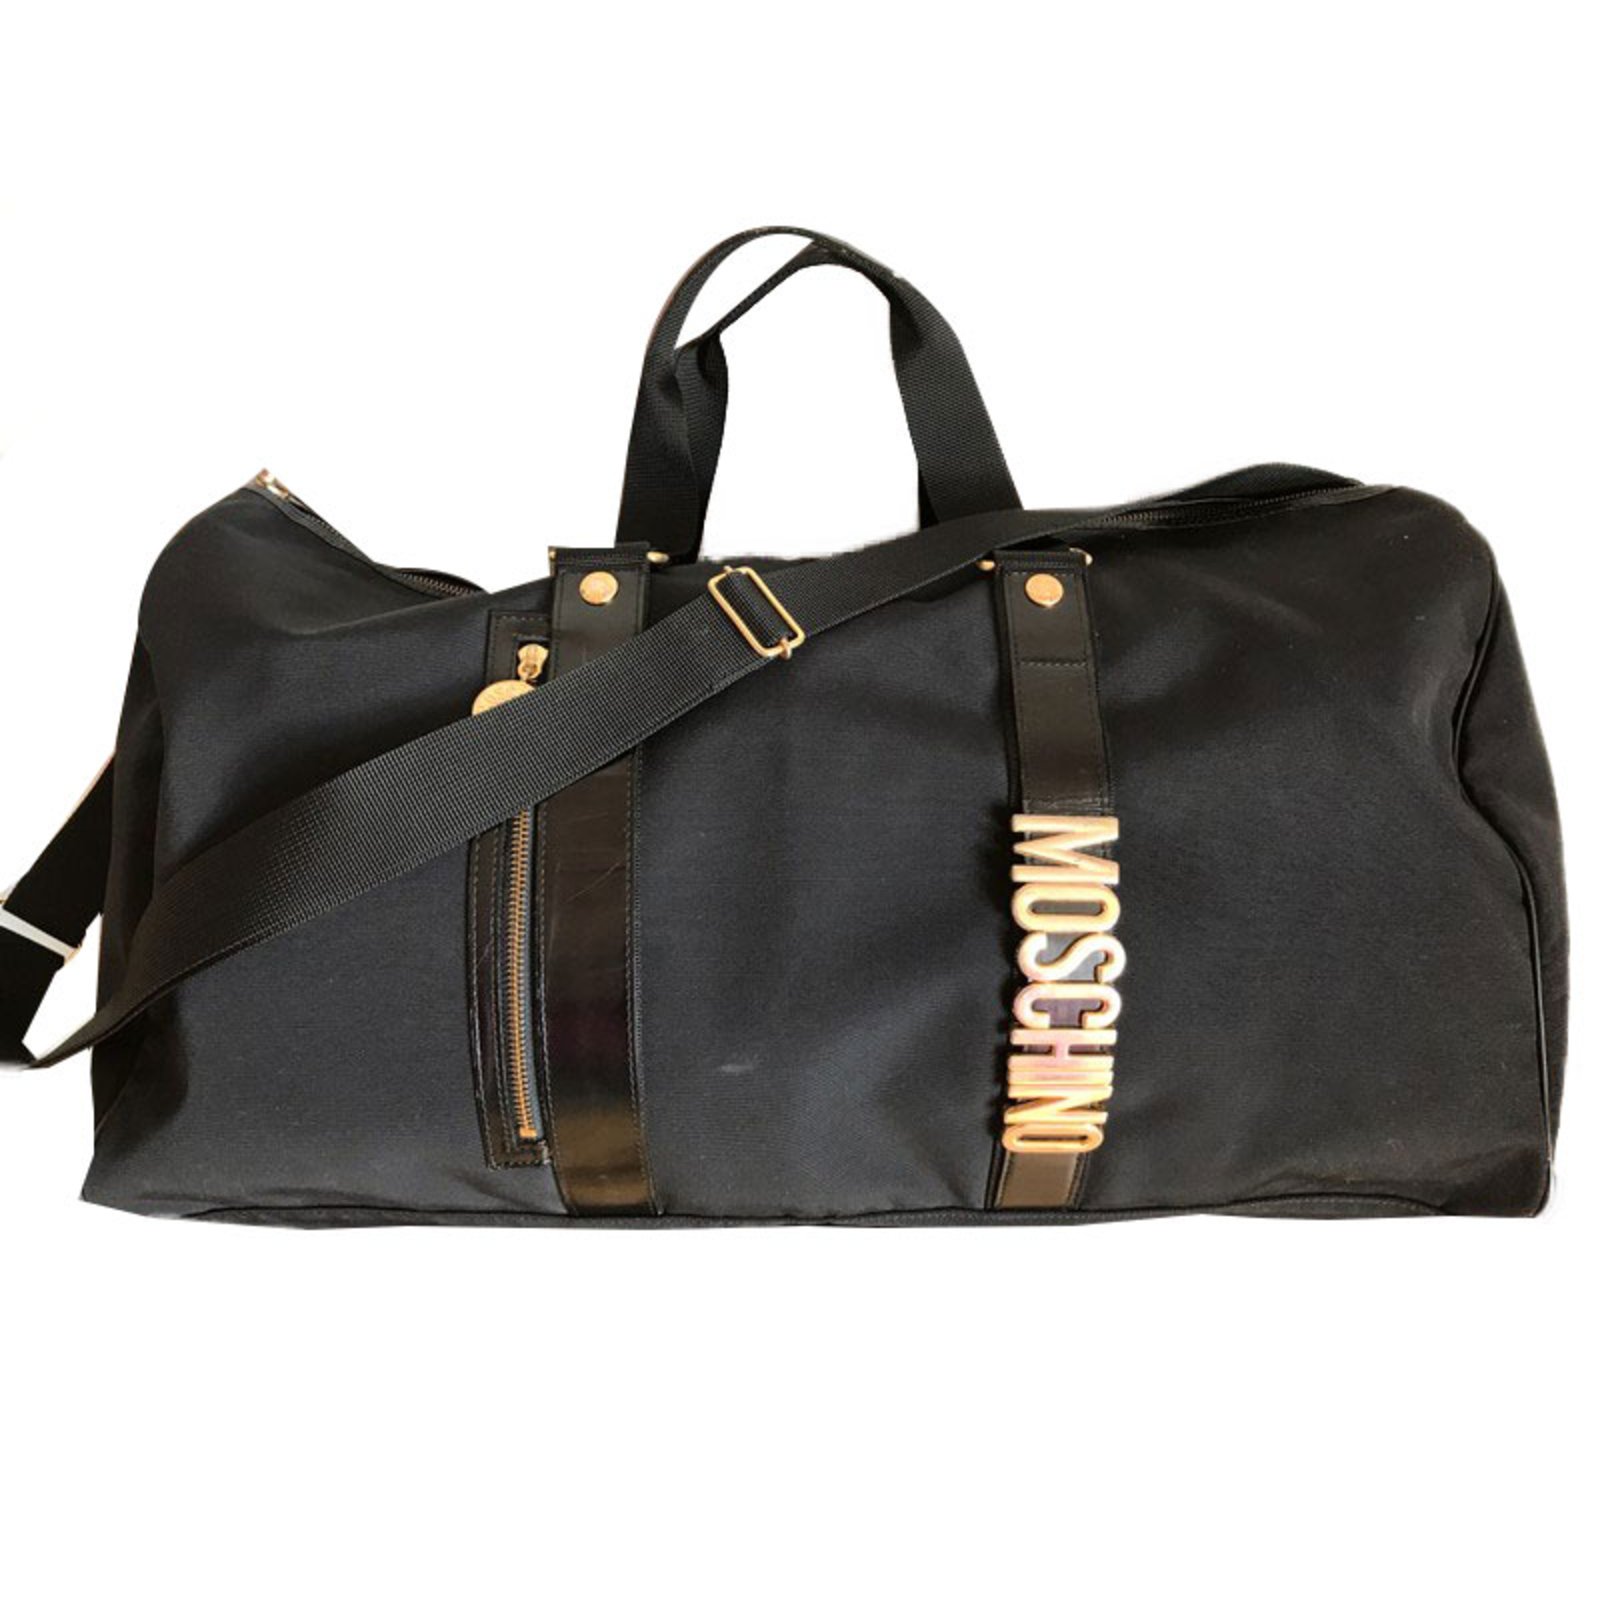 Moschino Travel bag with shoulder strap 